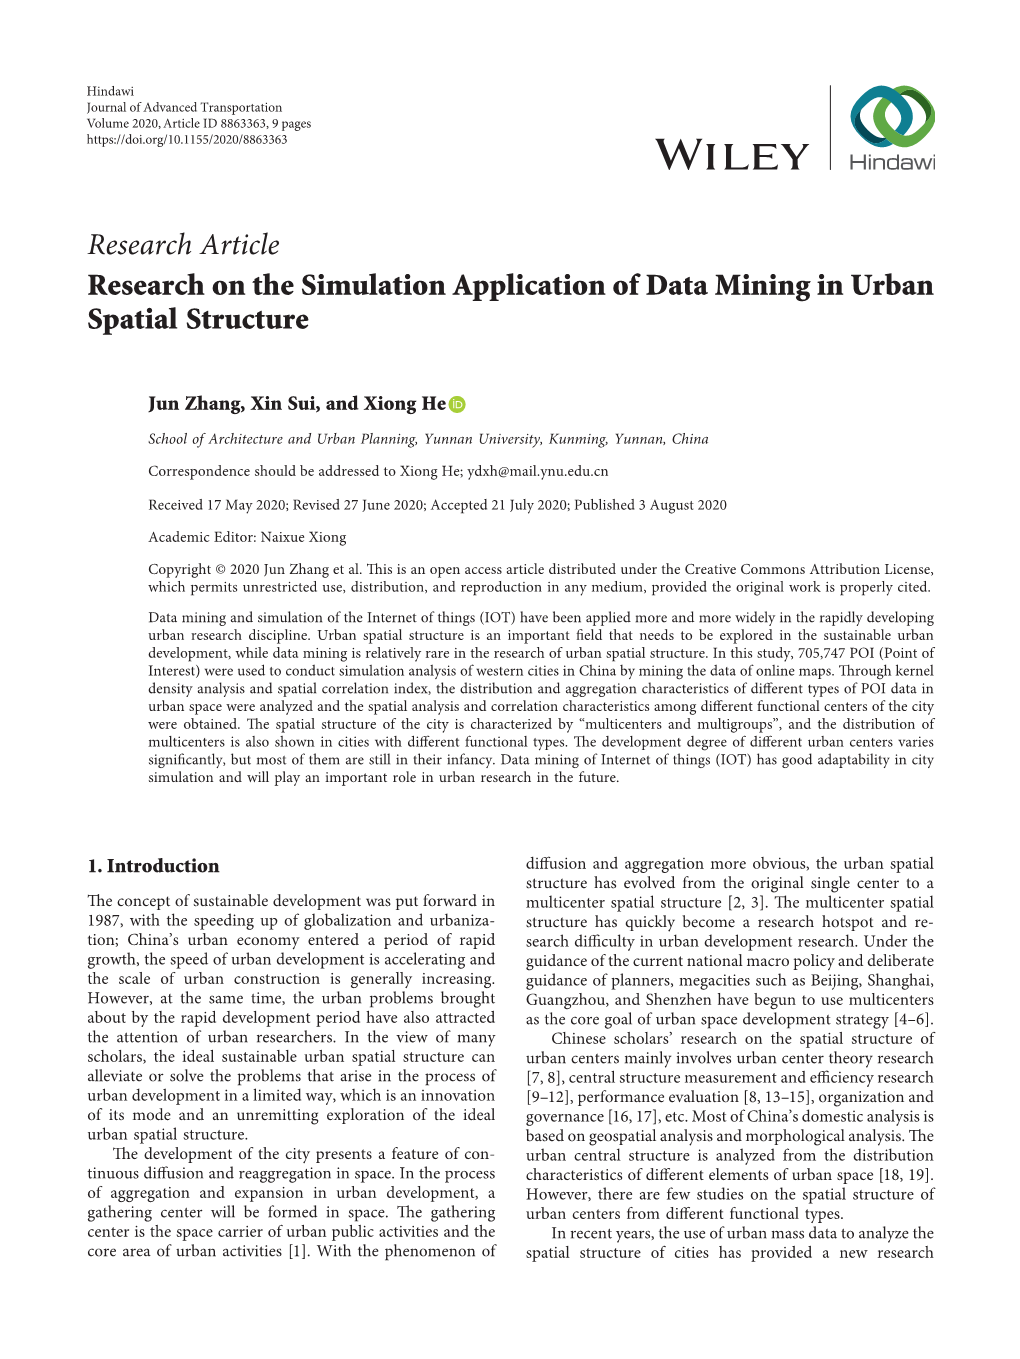 Research on the Simulation Application of Data Mining in Urban Spatial Structure